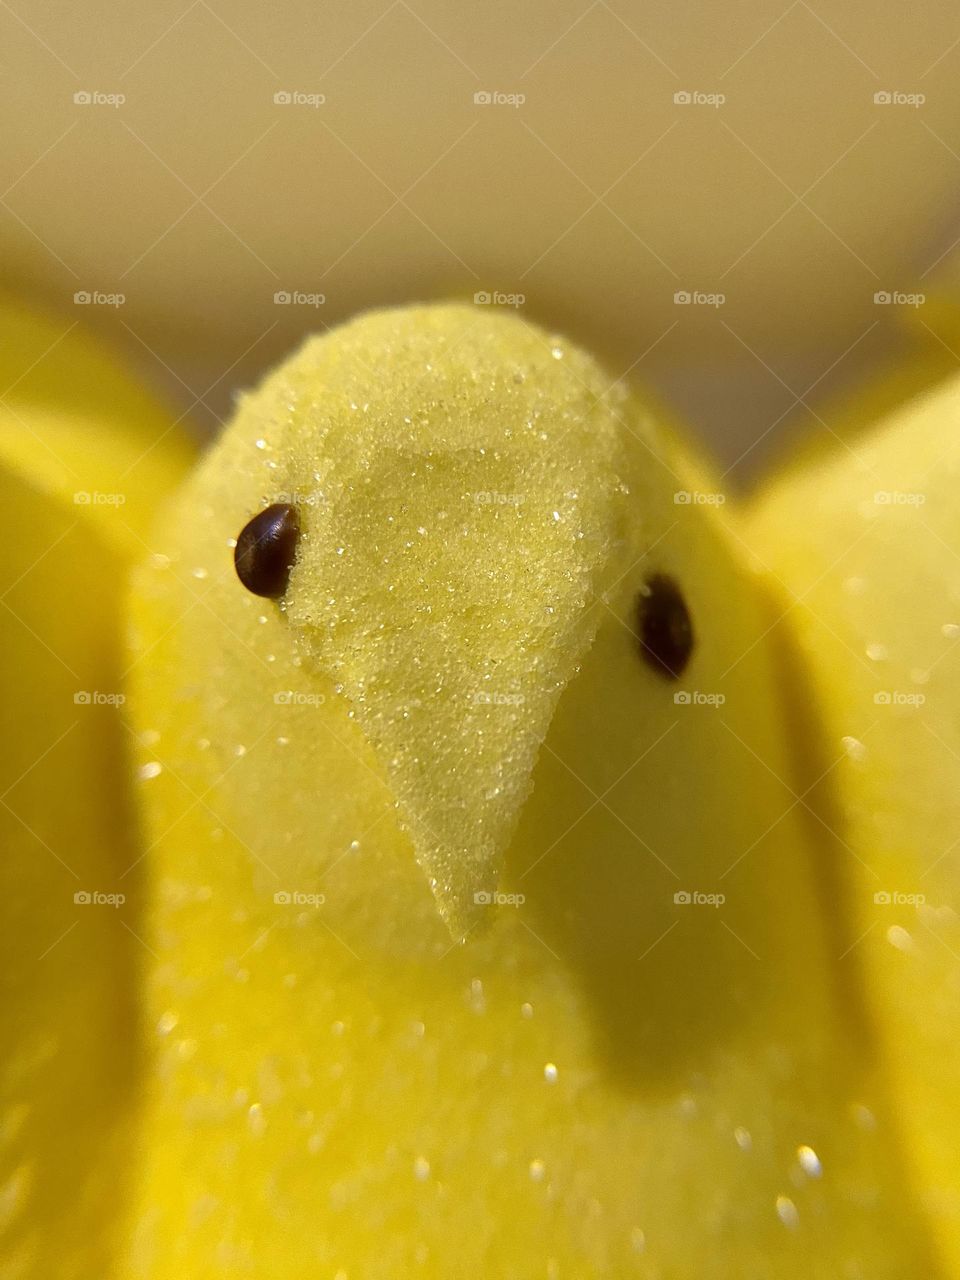 Close-up of a marshmallow Peep